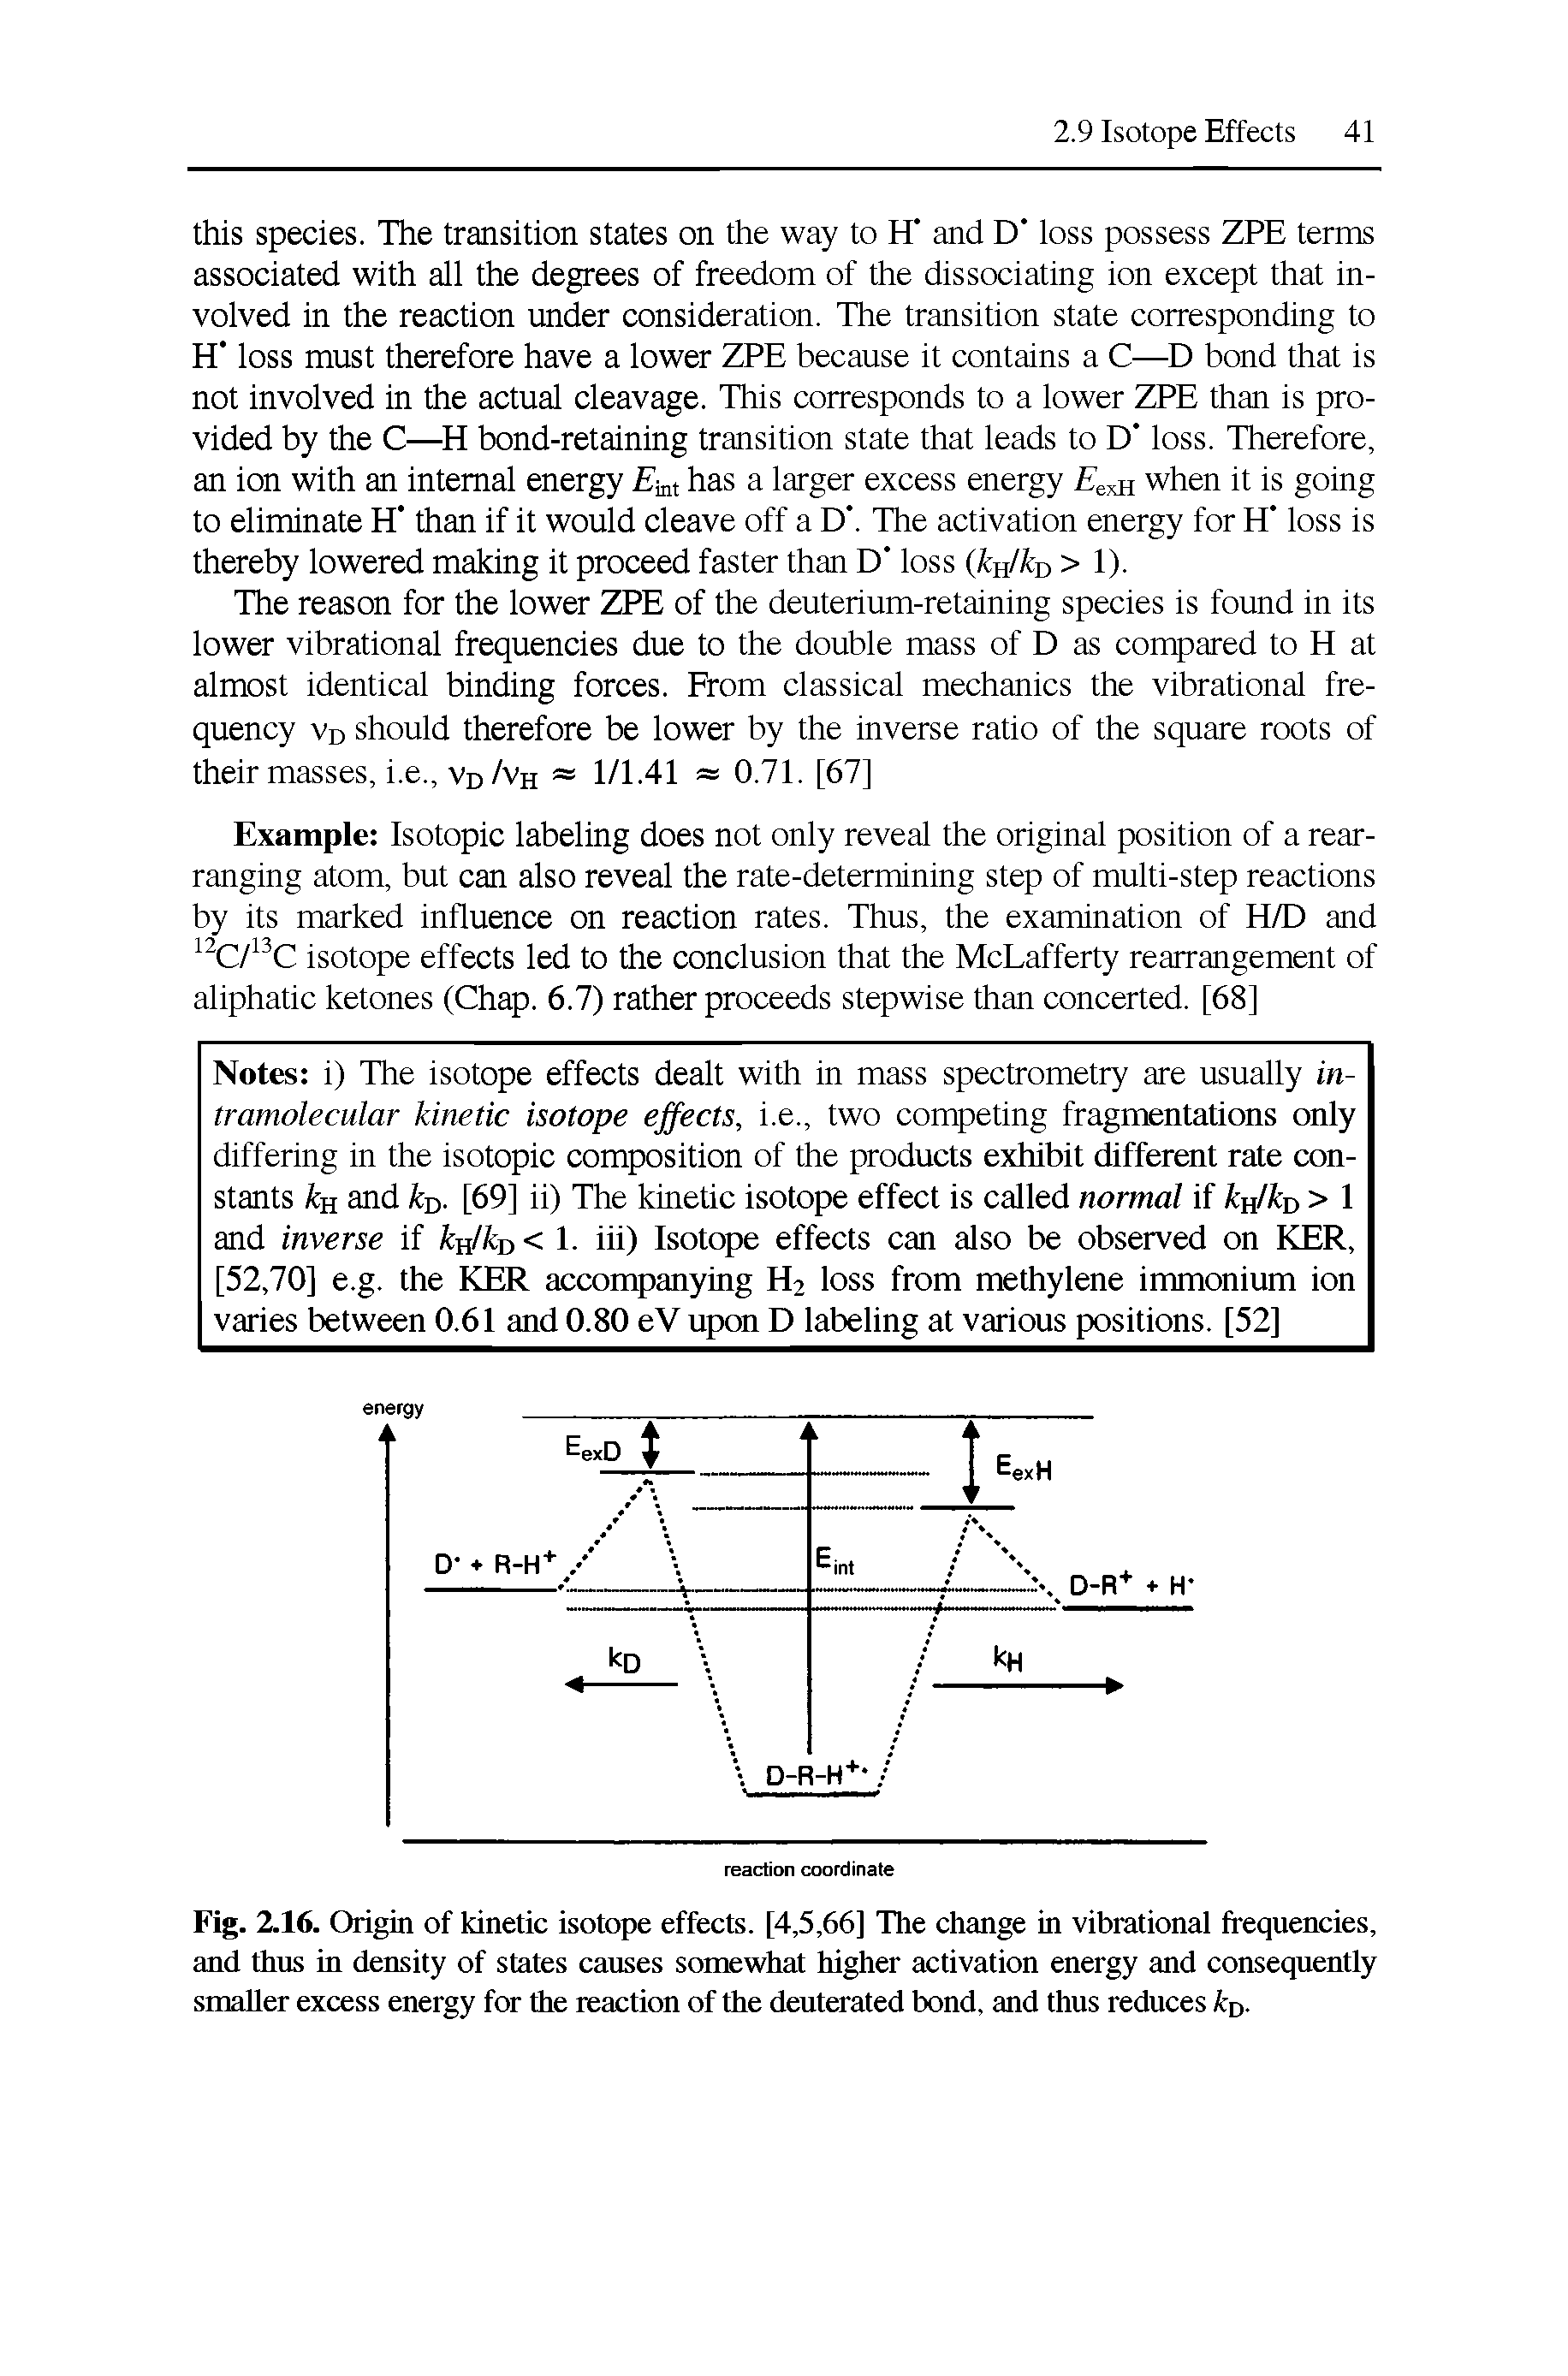 Fig. 2.16. Origin of kinetic isotope effects. [4,5,66] The change in vibrational frequencies, and thus in density of states causes somewhat higher activation energy and consequently smaller excess energy for the reaction of the deuterated bond, and thus reduces kxj.